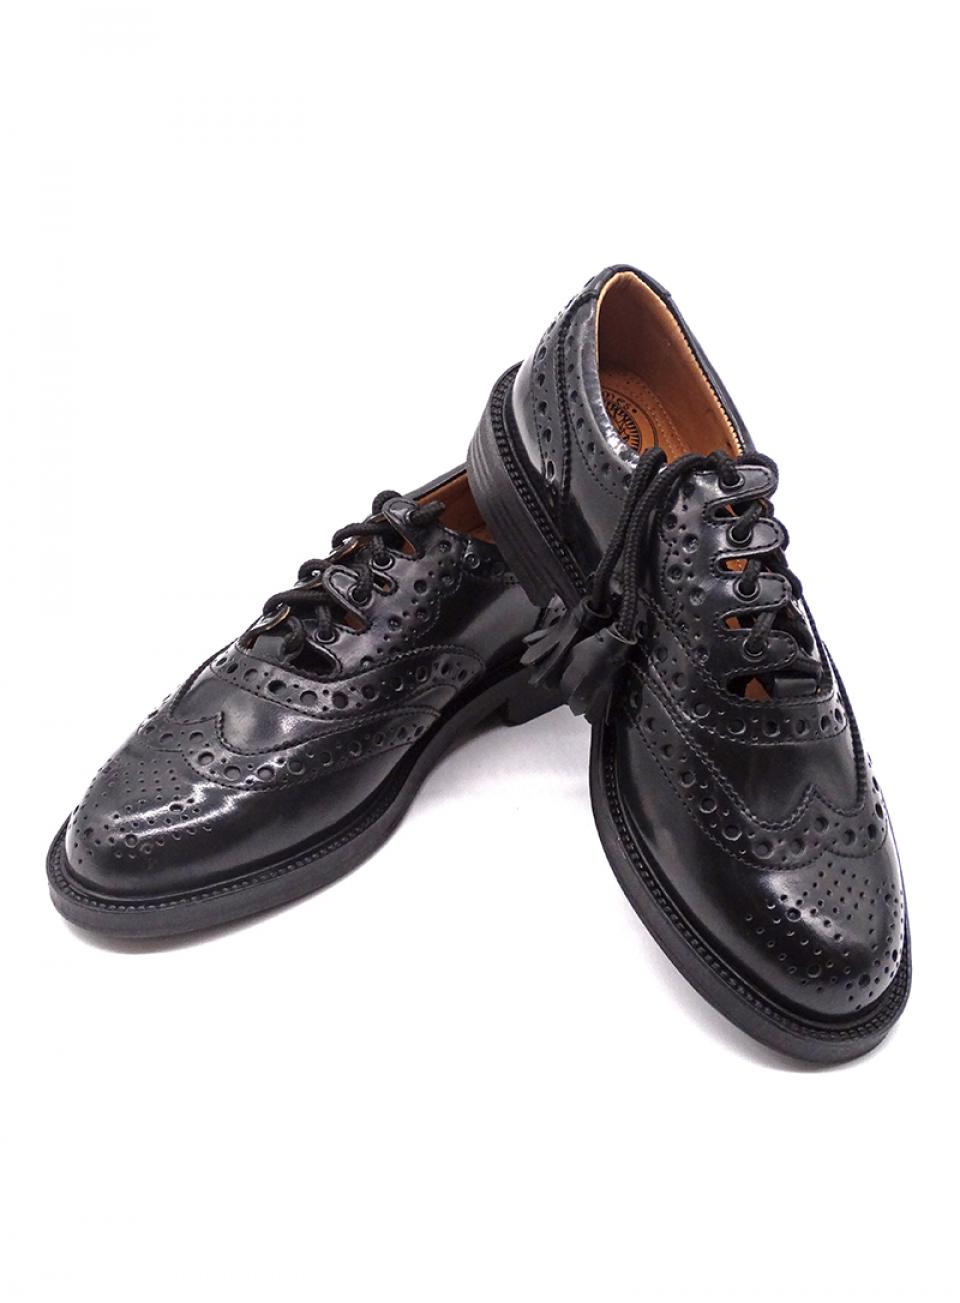 Scottish Ghillie Brogues